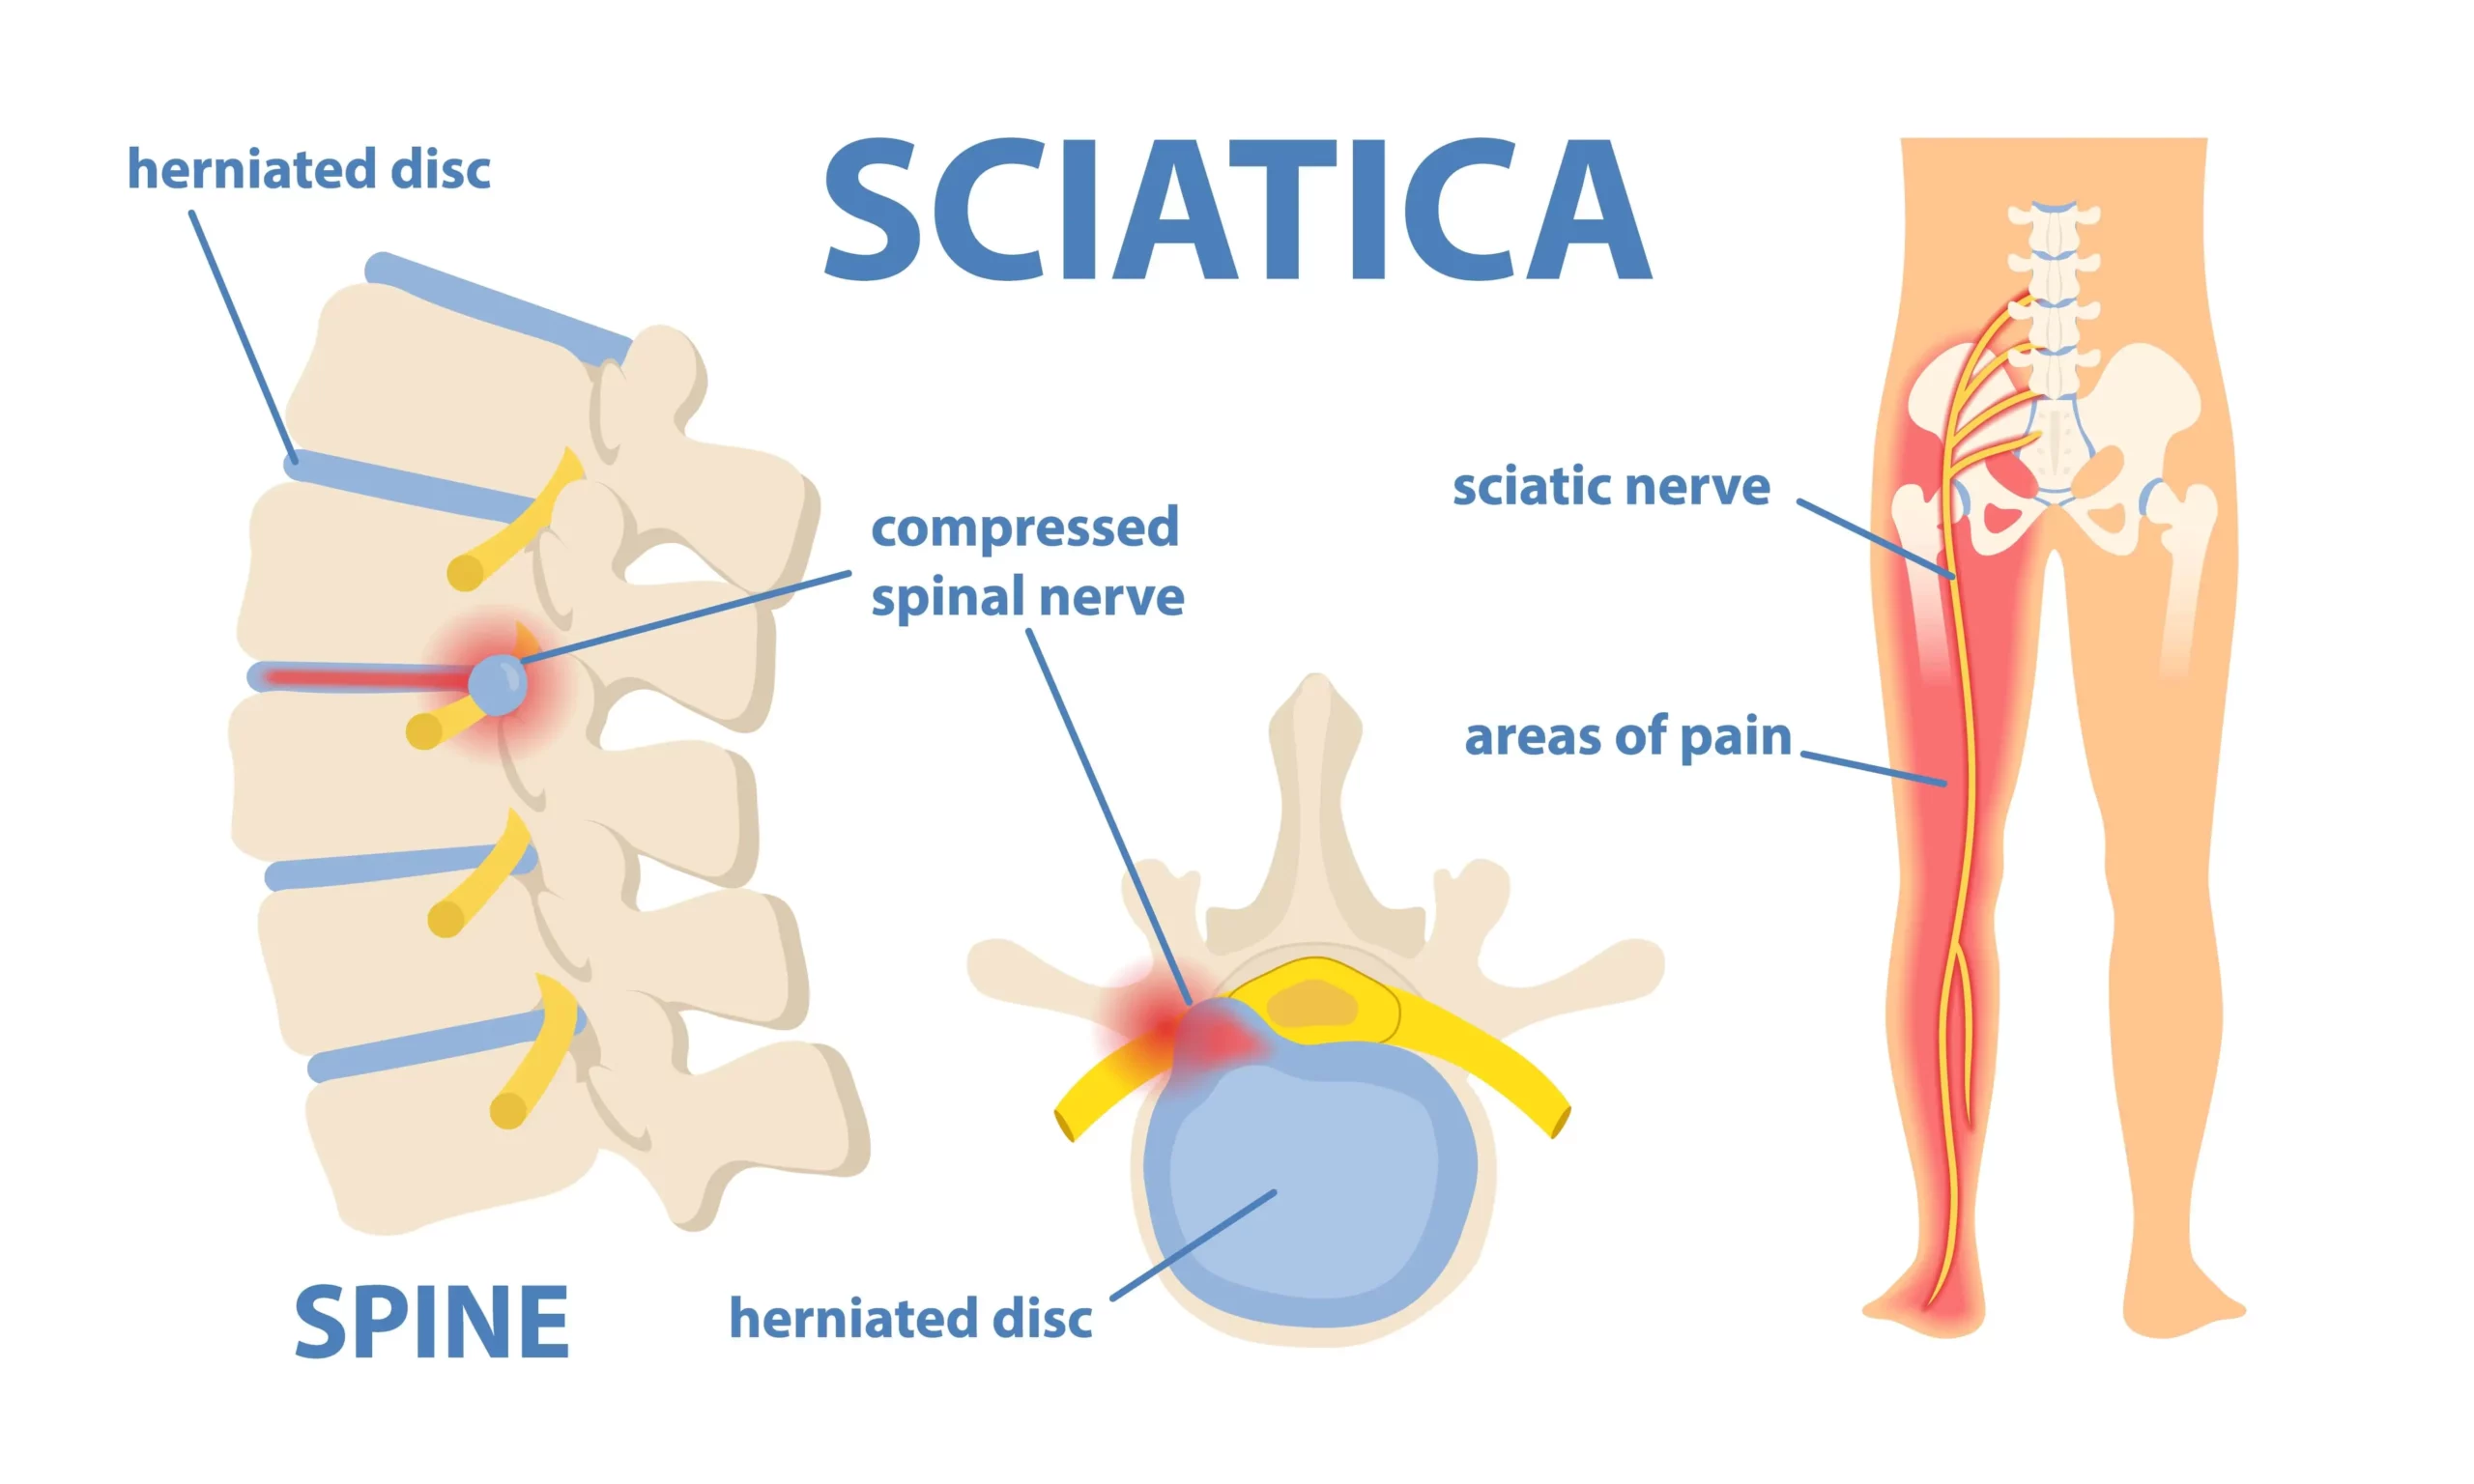 Sciatic nerve pain due to bulging or herniated disk